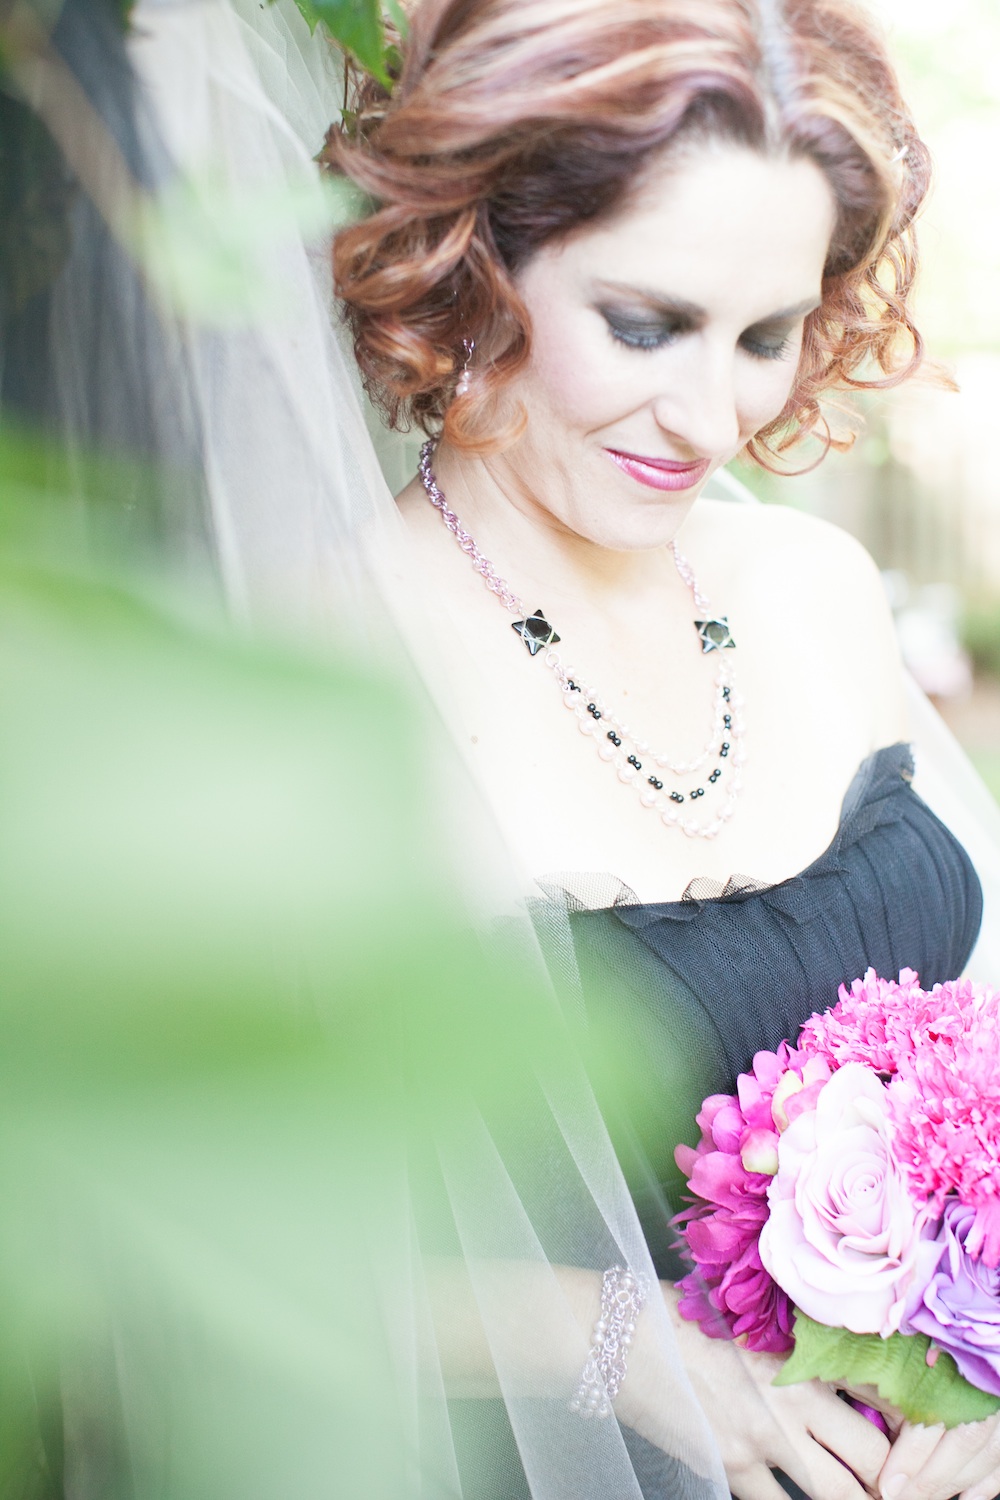  Elegant Halloween Wedding Styled Shoot / florals by EightTreeStreet / photo by {a}strid Photography 